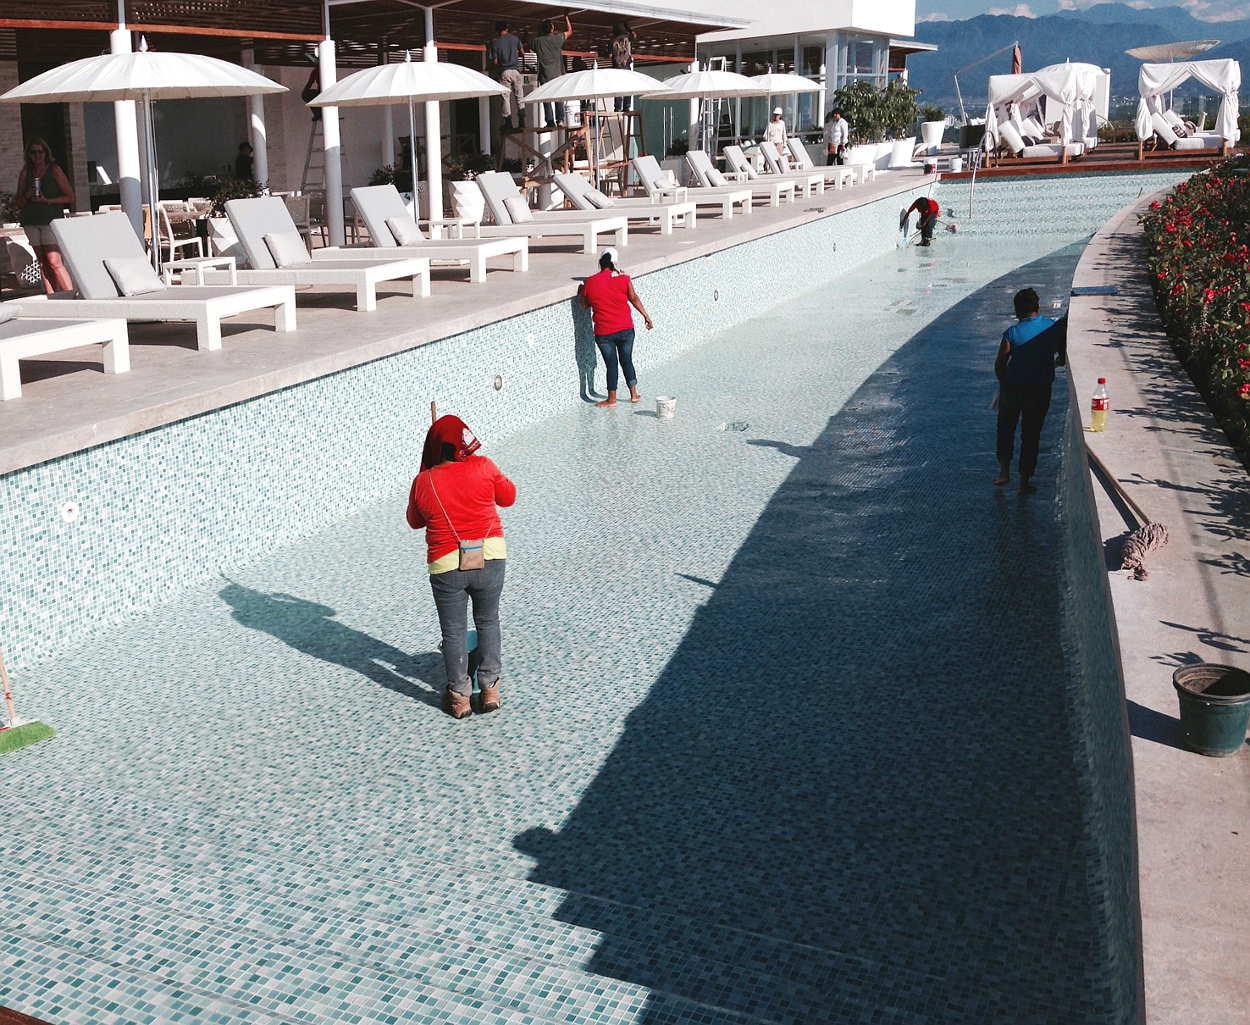 The Rooftop Pool and Restaurant at the Residence Tower have great views.  Here, a crew is cleaning the pool in preparation for the opening.  May occur any time.